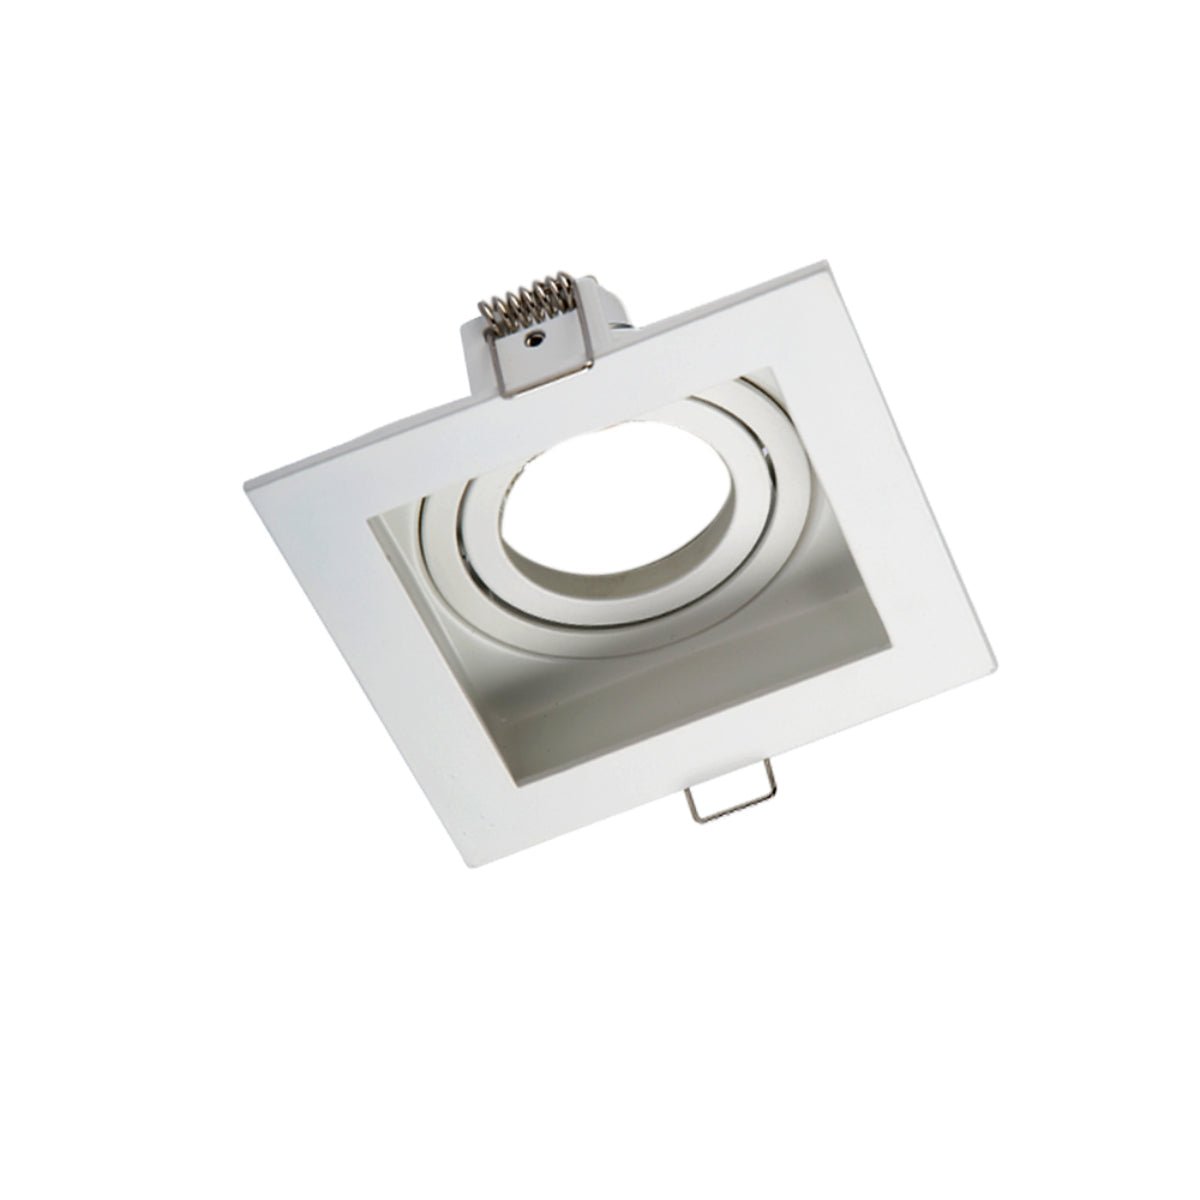 Main image of Grille Square Recessed Tilt Downlight White with GU10 Fitting | TEKLED 165-03872